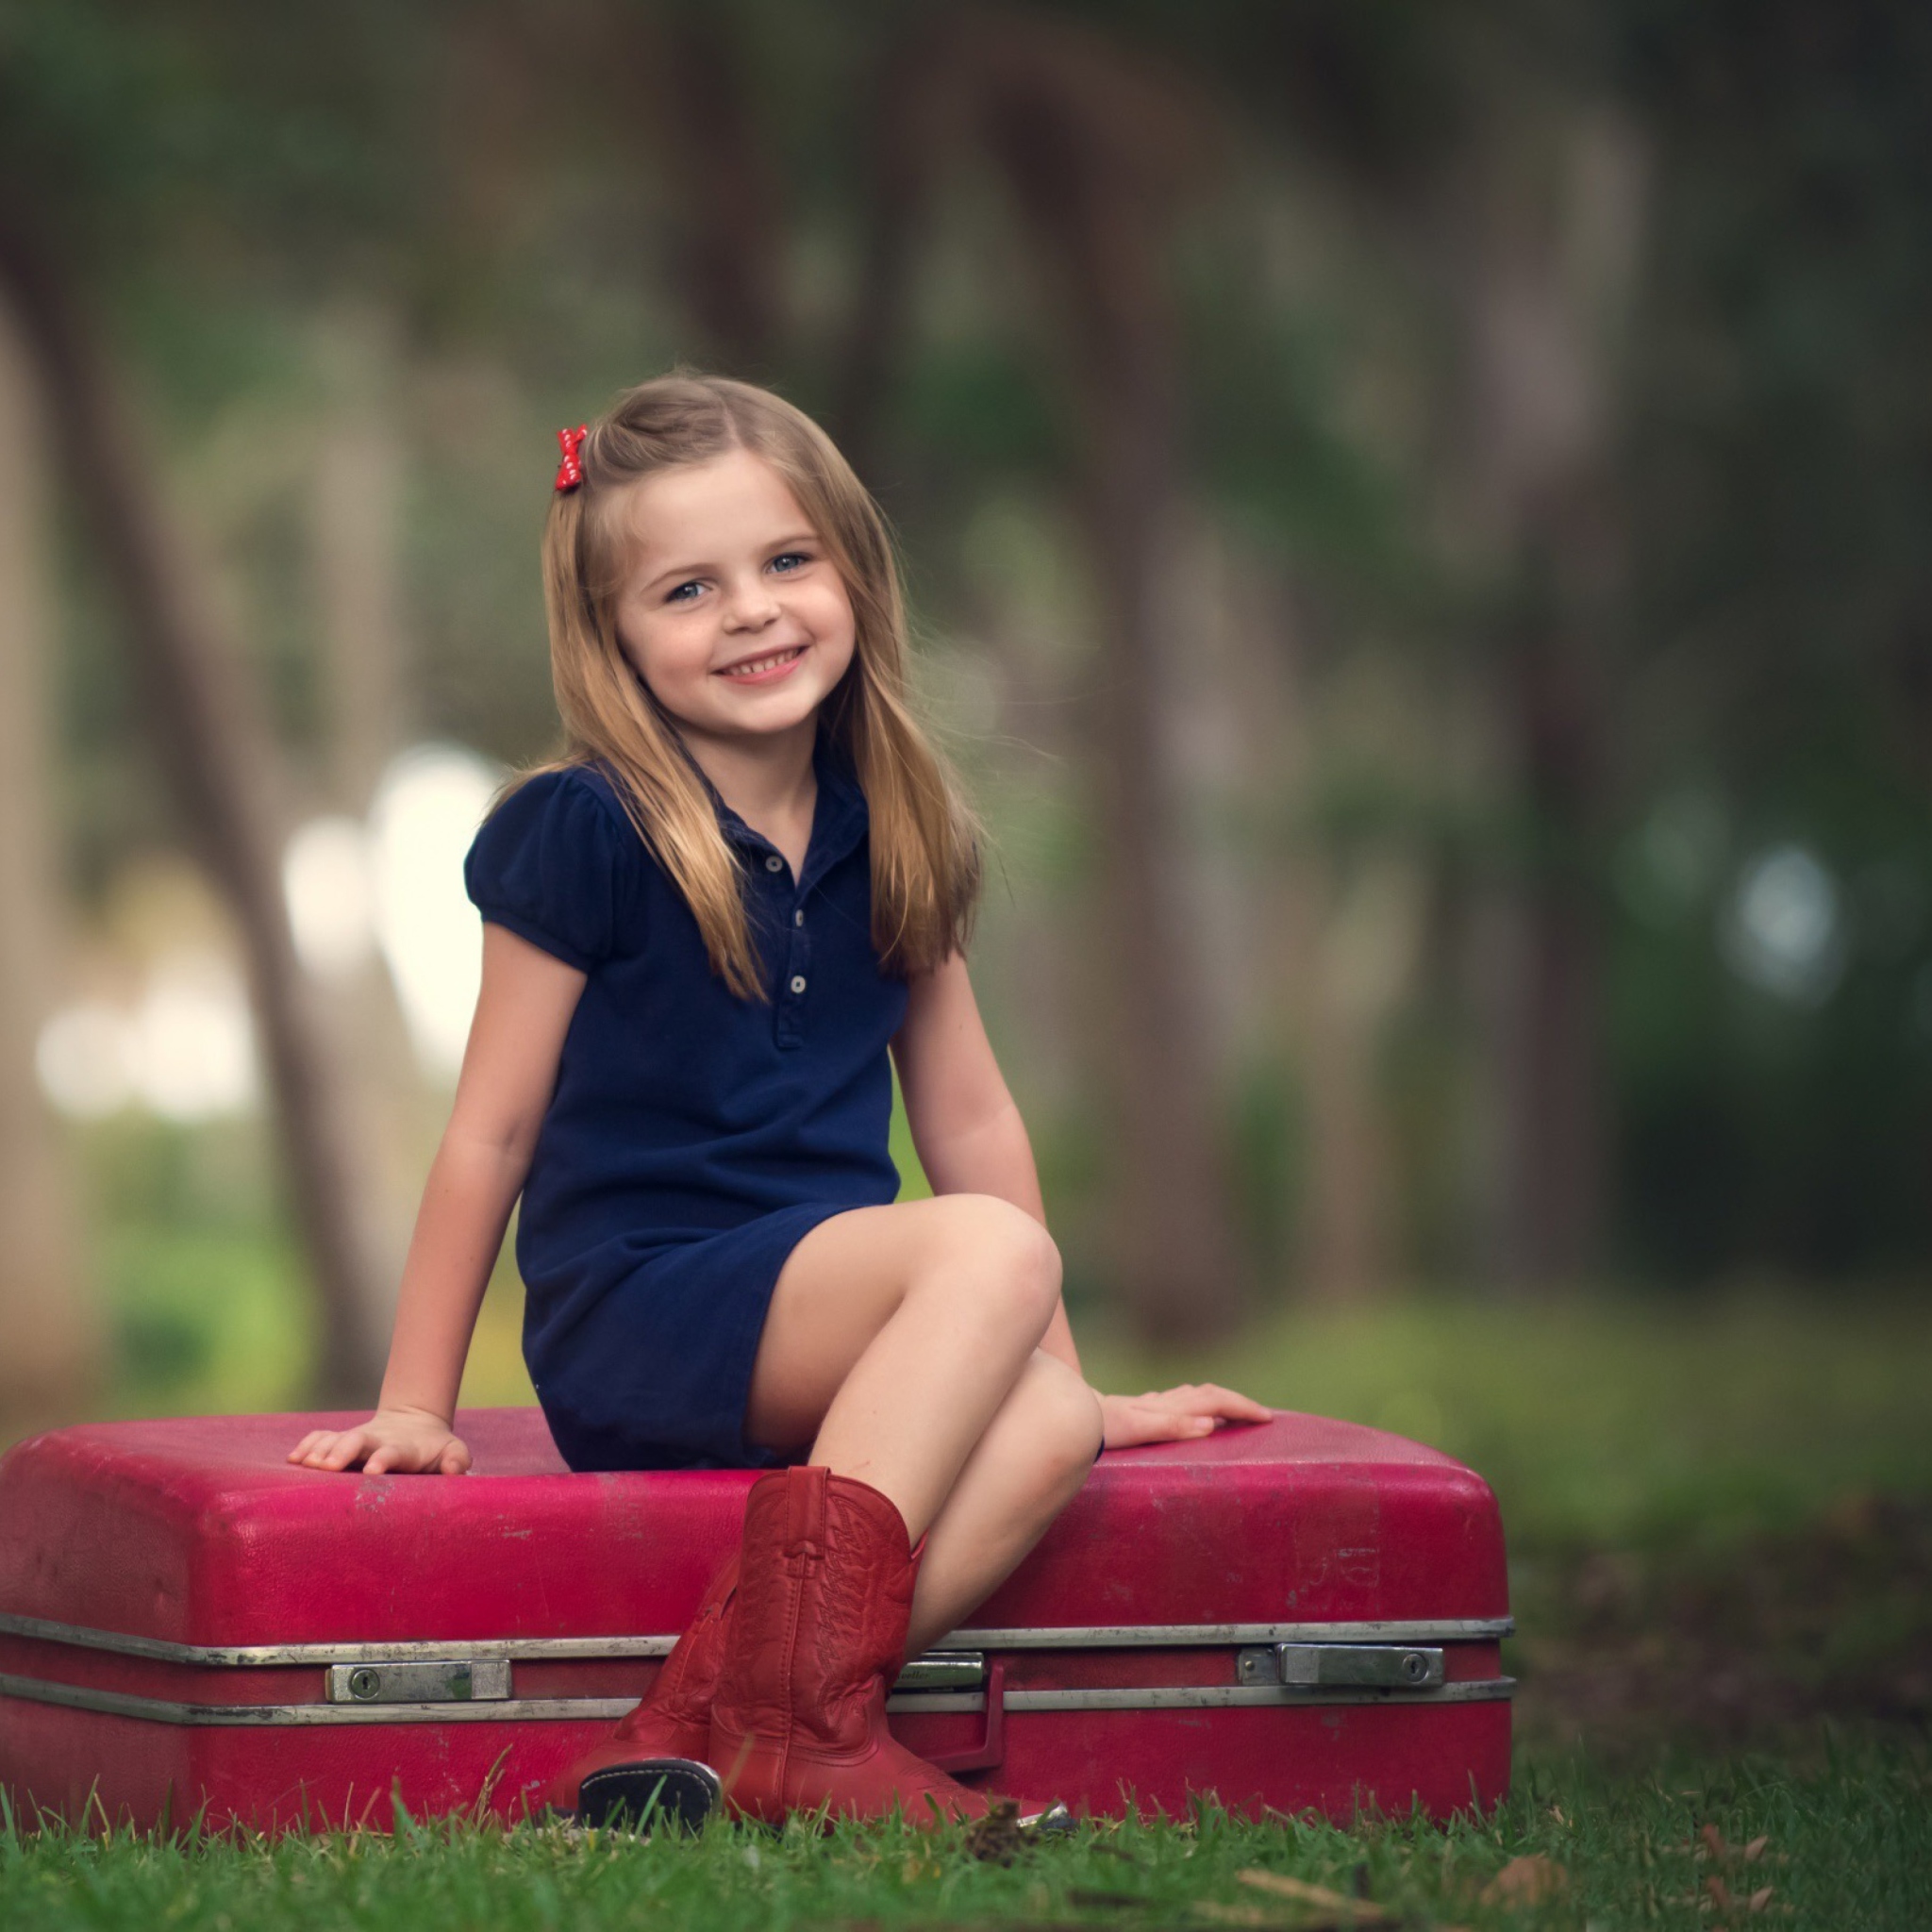 Little Girl Sitting On Red Suitcase screenshot #1 2048x2048